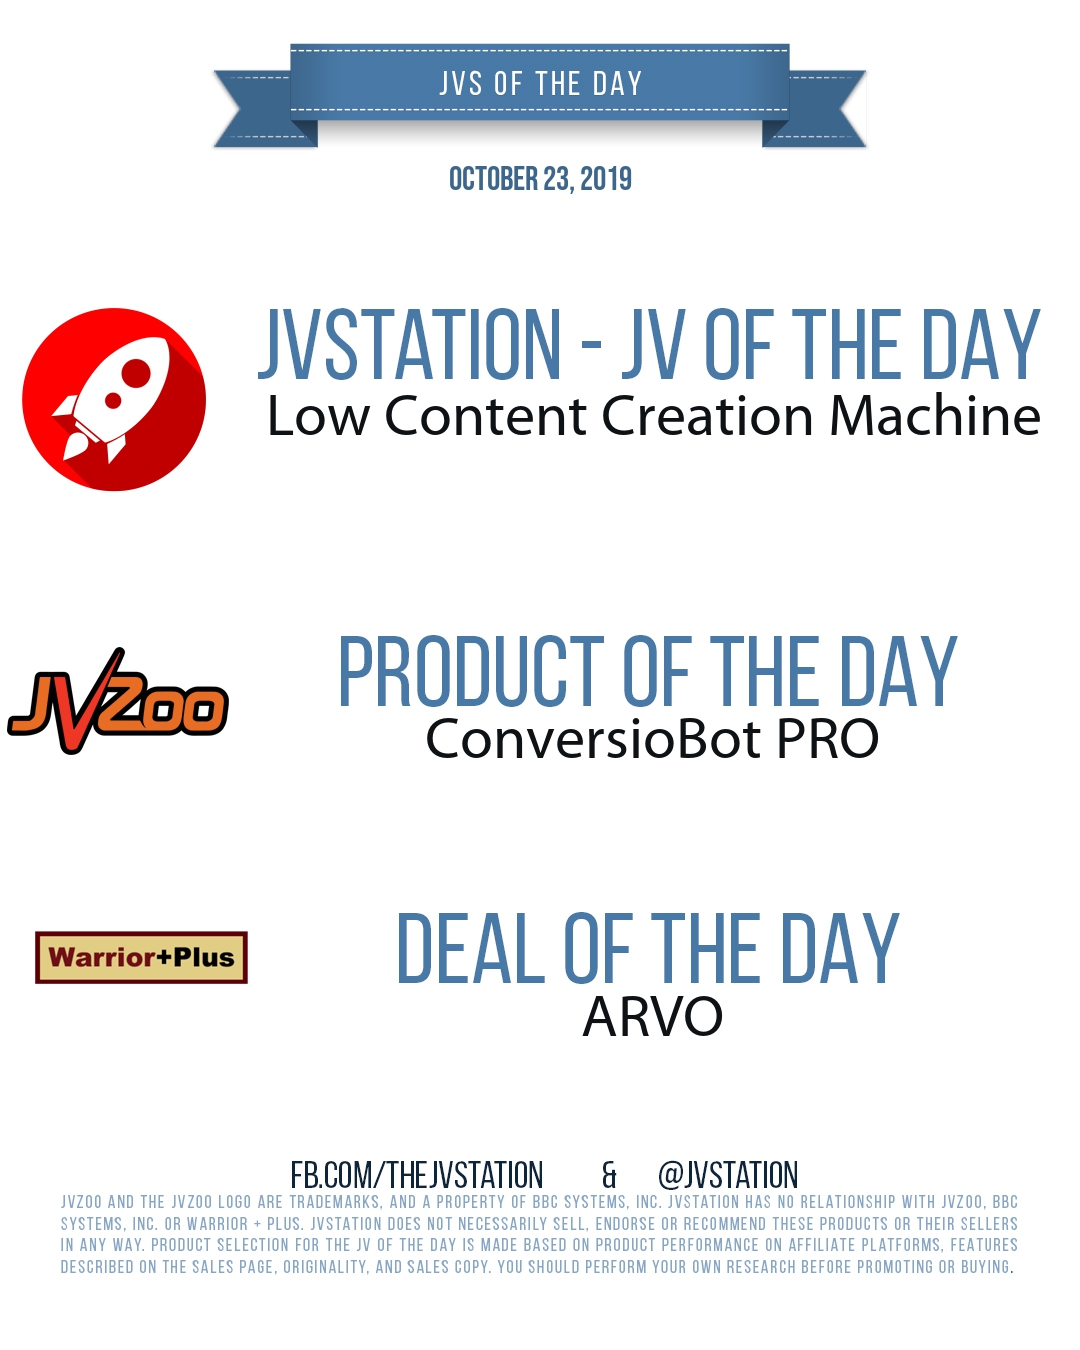 JVs of the day - October 23, 2019